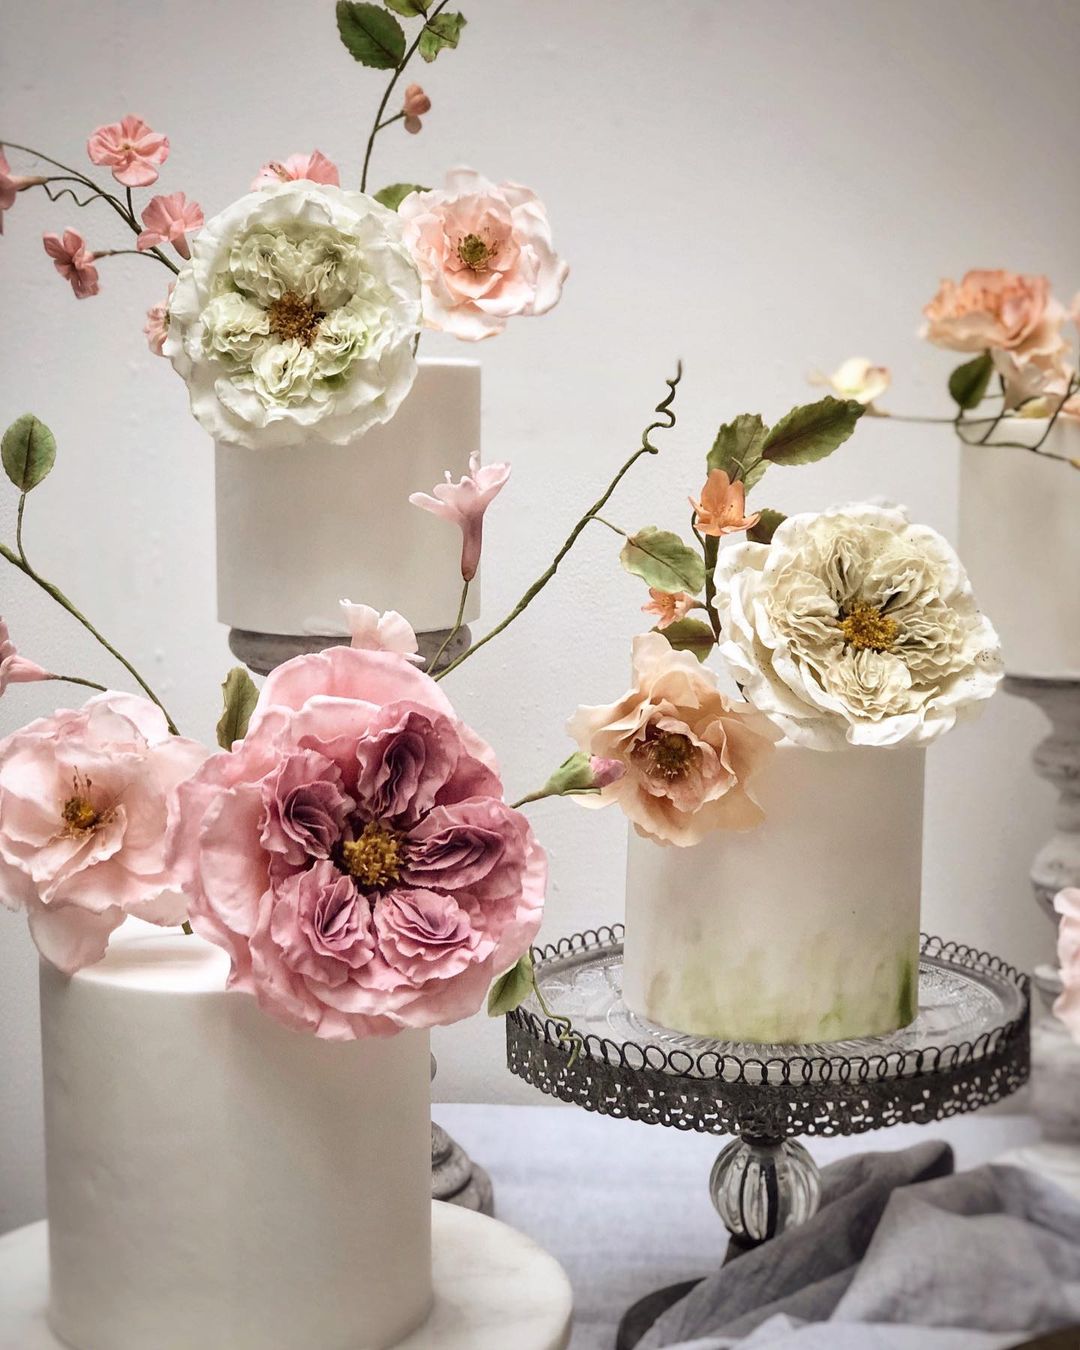 The Edible Art From Cake Atelier Amsterdam002